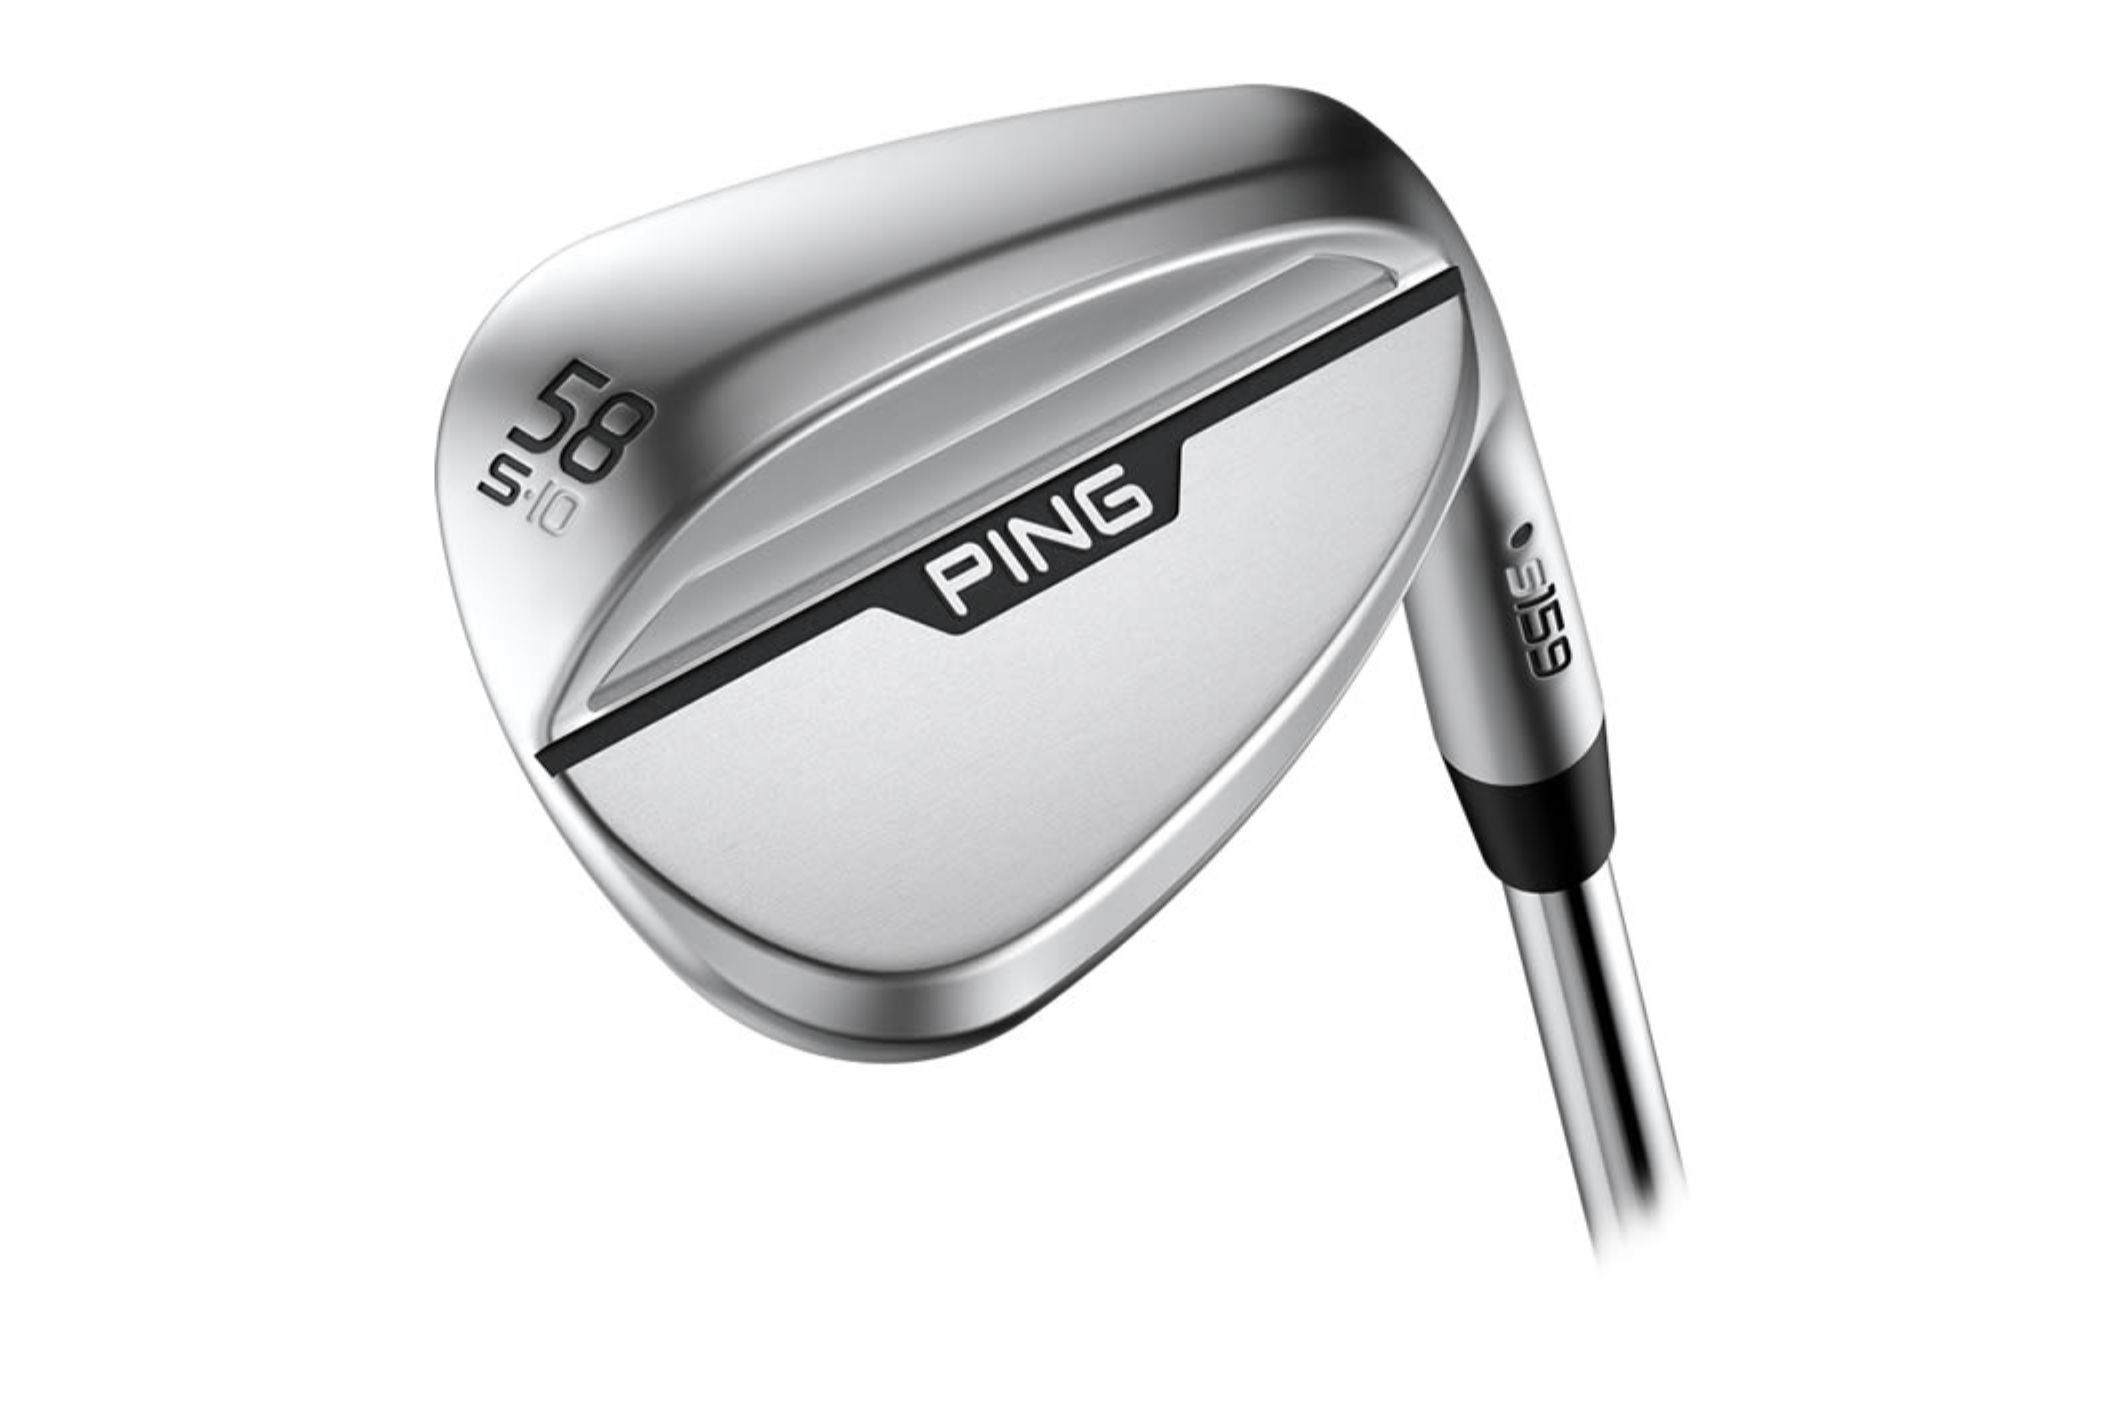 PING s159 Golf Wedge.